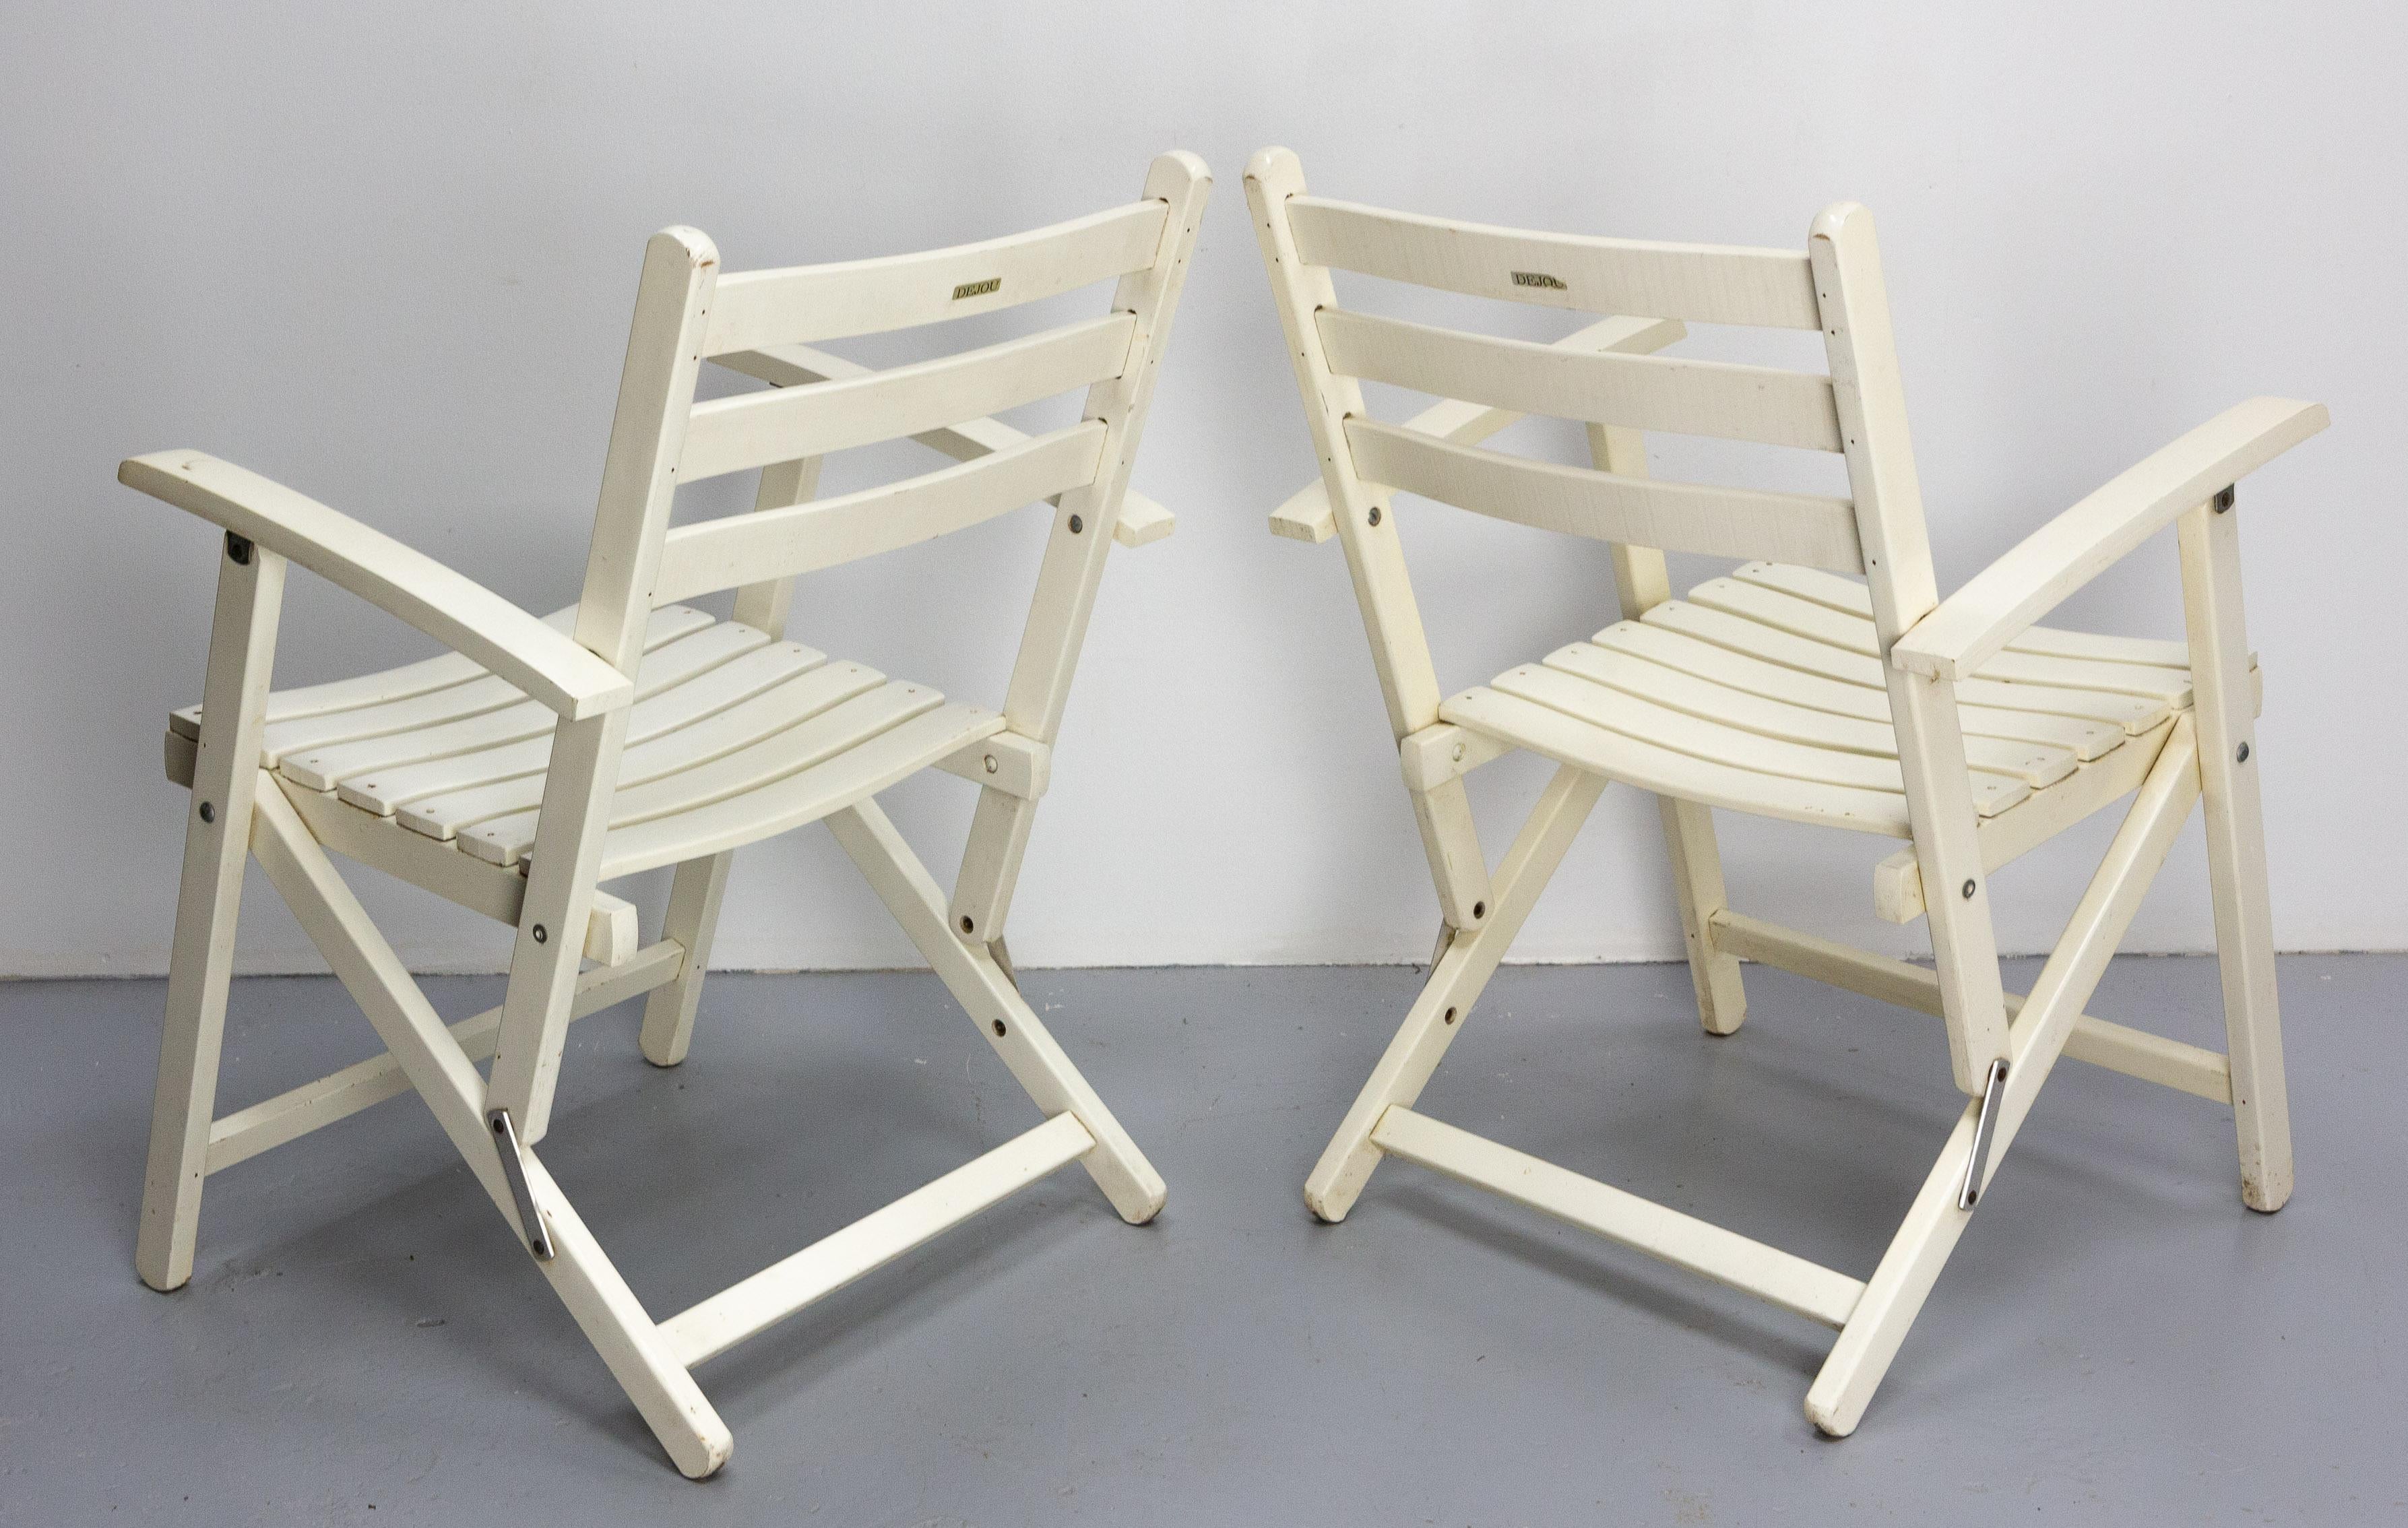  Four Wood Dining Folding Chairsgarden and Patio by Dejou 1